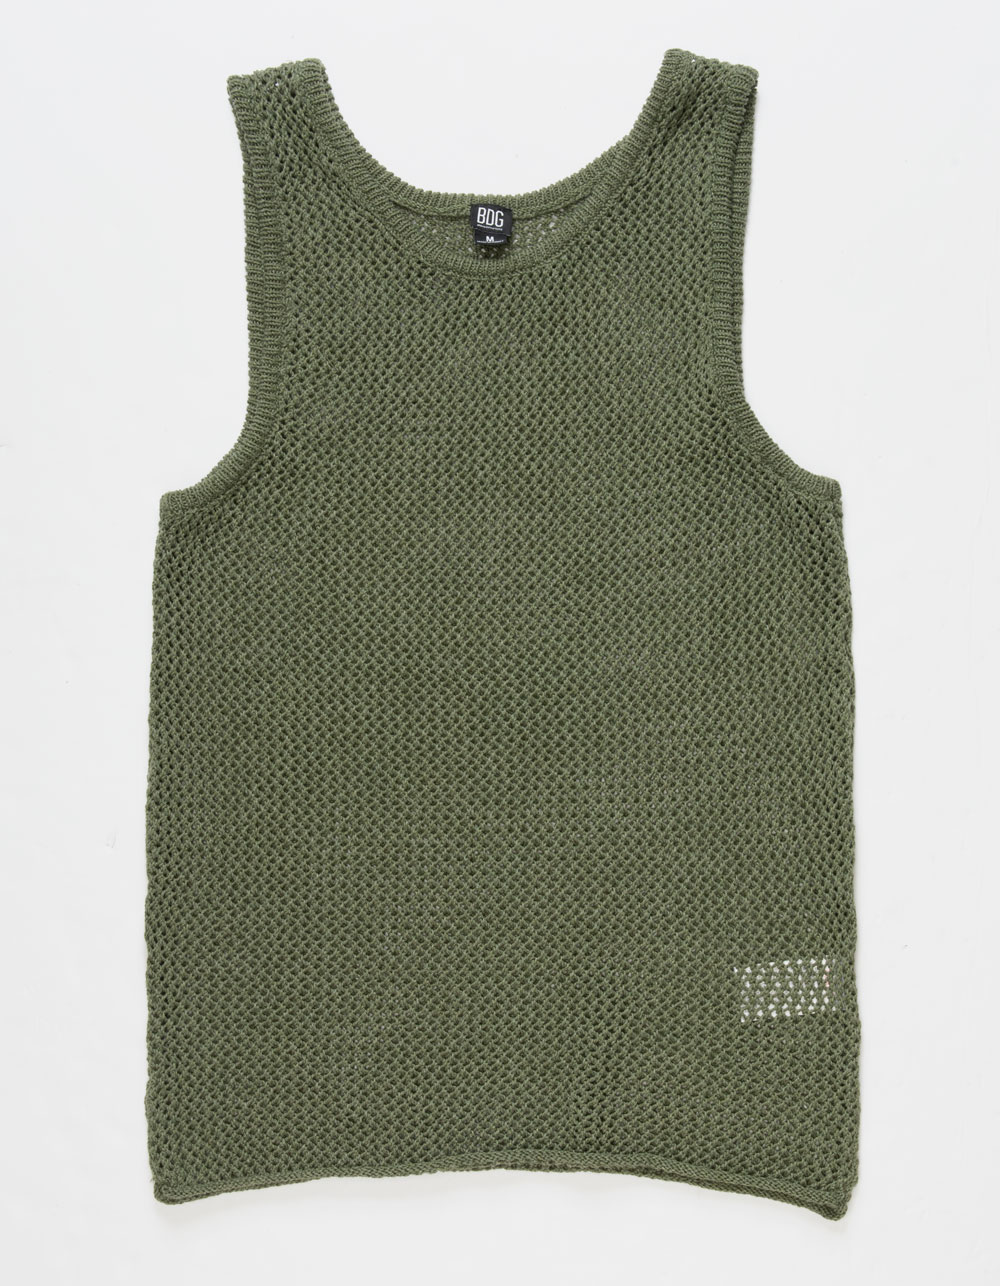 BGD Urban Outfitters Open Knit Mens Tank Top